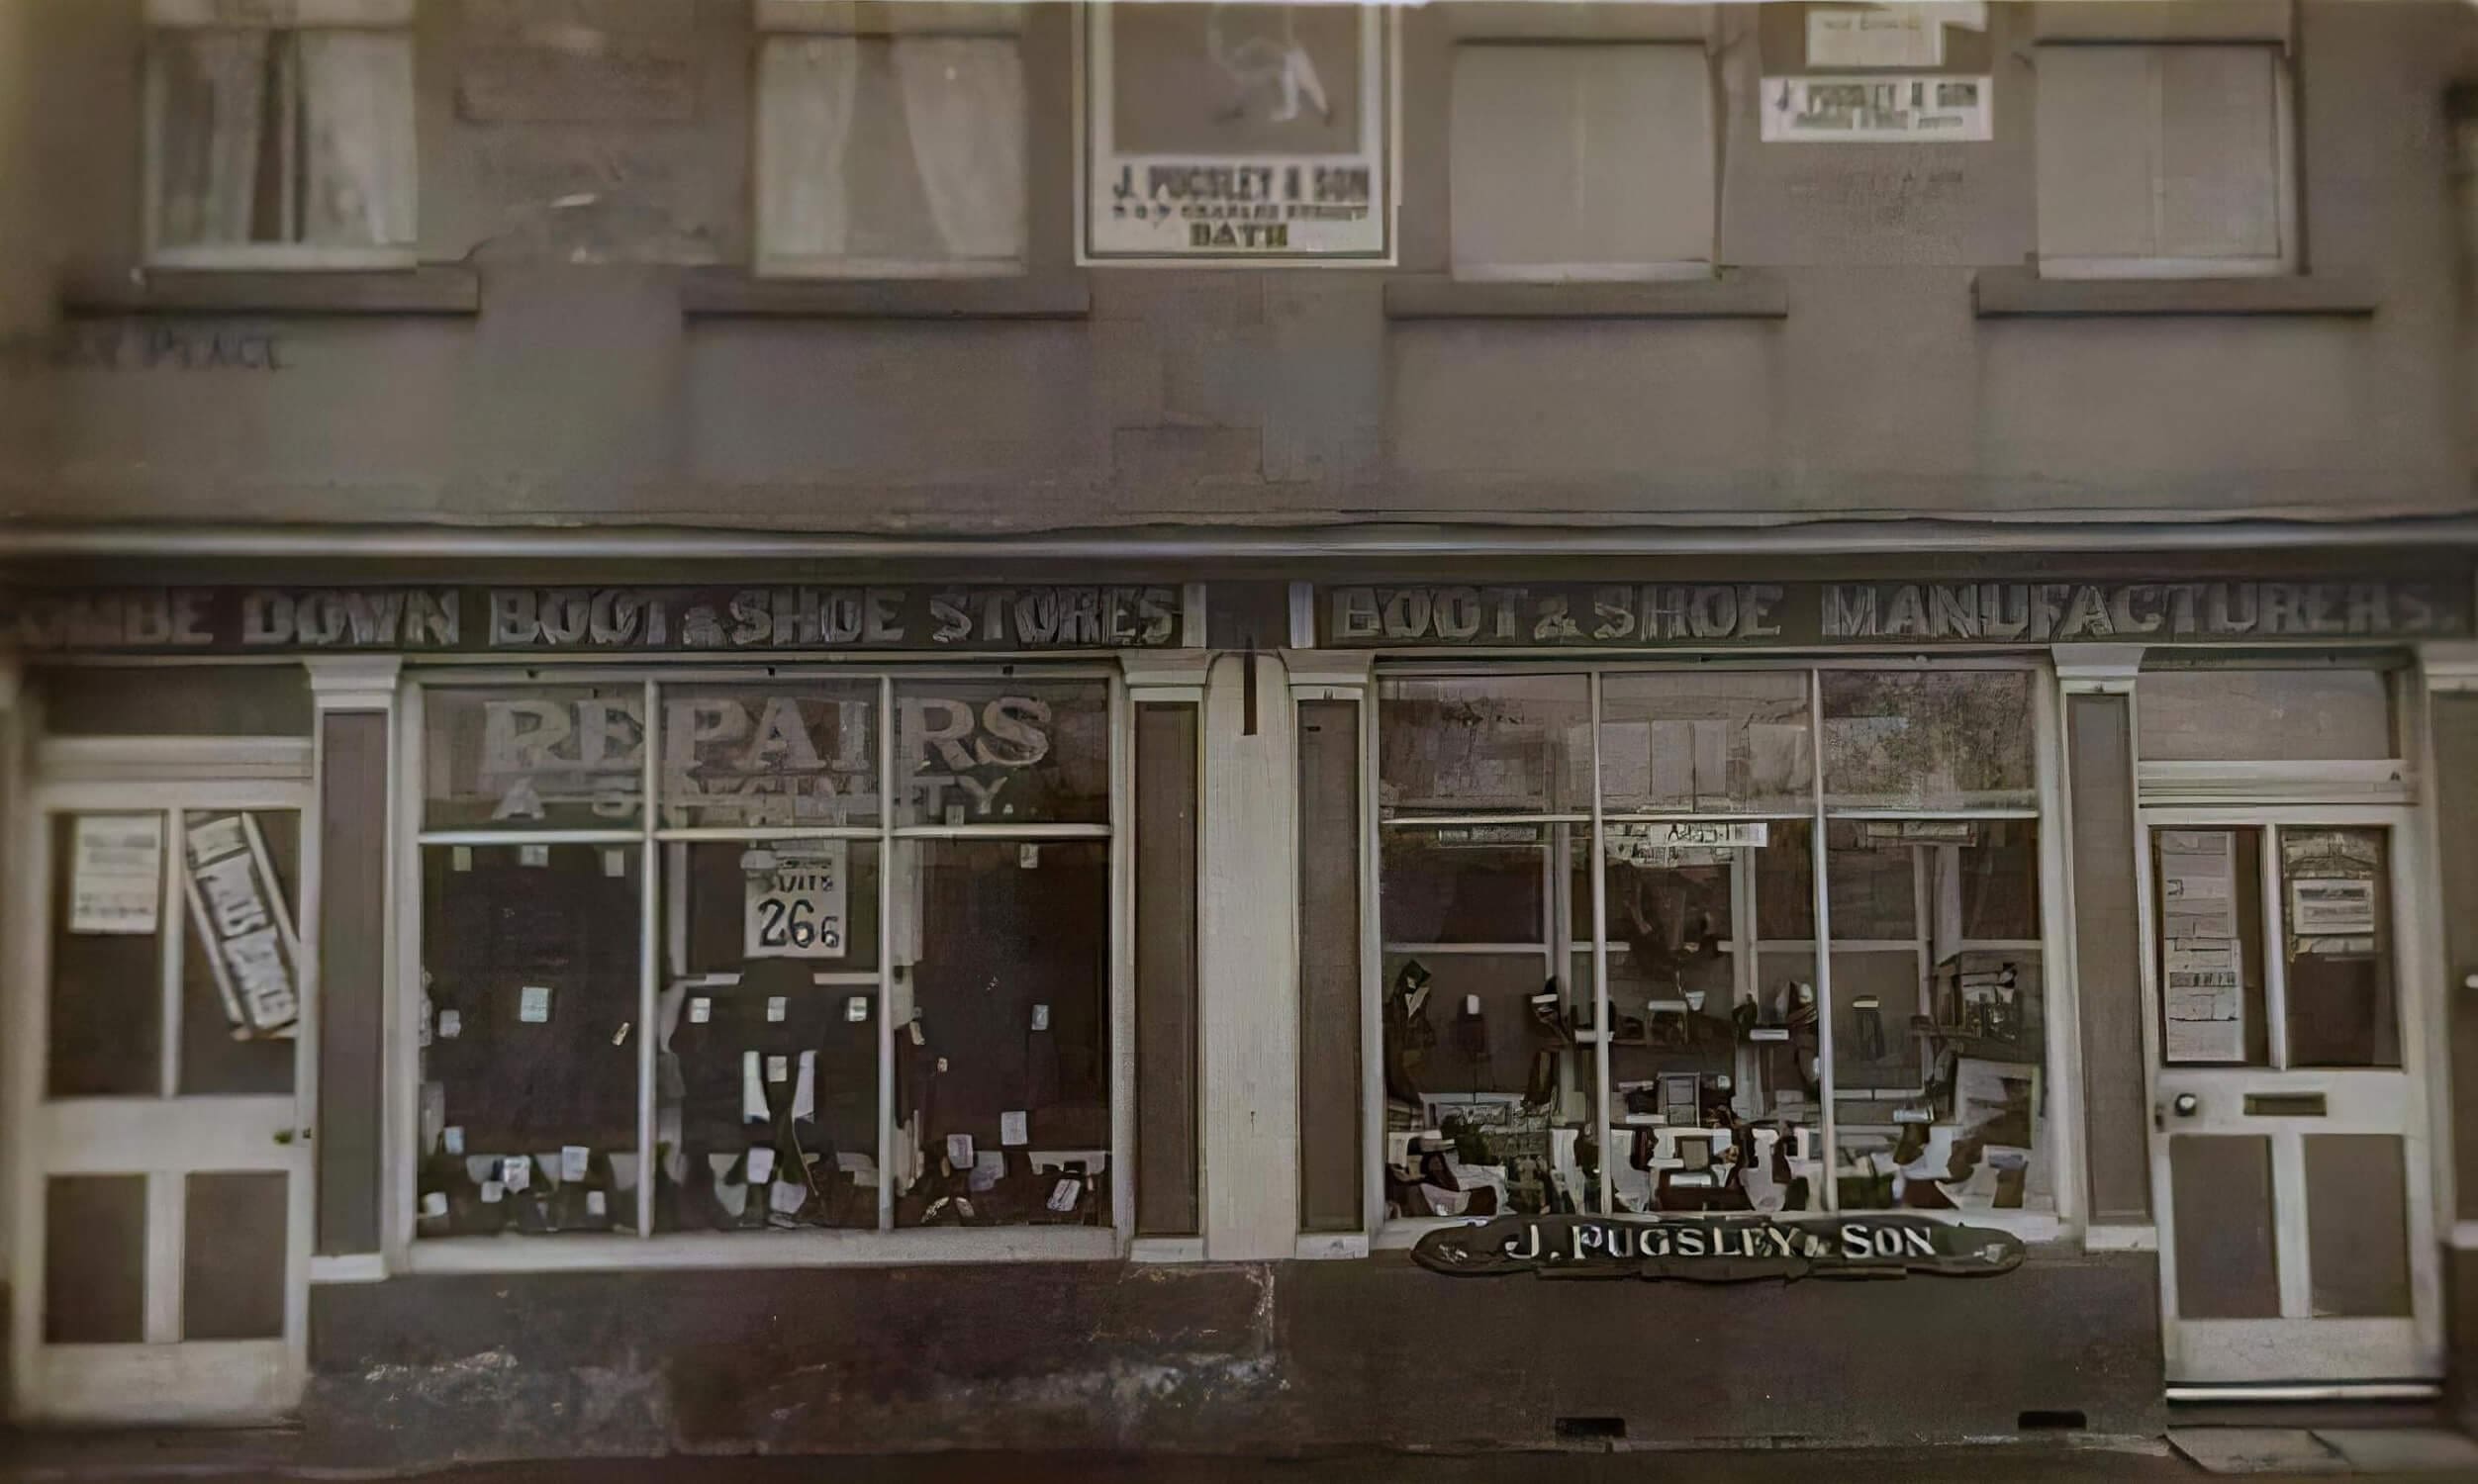 Combe Down boot and shoe shop early 1900s